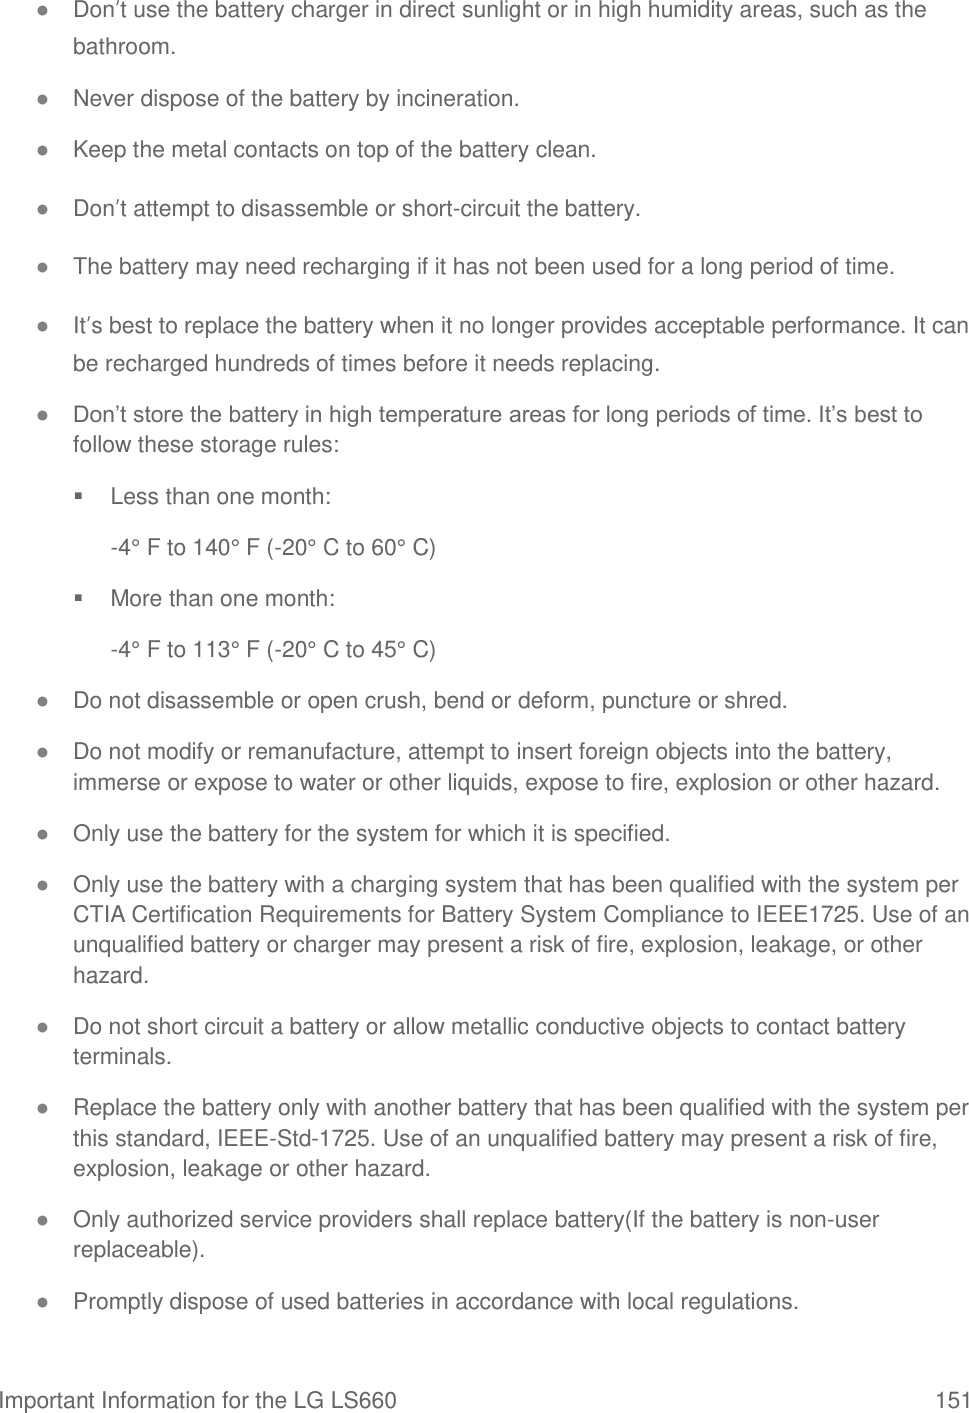 Important Information for the LG LS660  151 ● Don’t use the battery charger in direct sunlight or in high humidity areas, such as the bathroom. ● Never dispose of the battery by incineration. ● Keep the metal contacts on top of the battery clean. ● Don’t attempt to disassemble or short-circuit the battery. ● The battery may need recharging if it has not been used for a long period of time. ● It’s best to replace the battery when it no longer provides acceptable performance. It can be recharged hundreds of times before it needs replacing. ● Don‘t store the battery in high temperature areas for long periods of time. It‘s best to follow these storage rules:   Less than one month: -4° F to 140° F (-20° C to 60° C)   More than one month: -4° F to 113° F (-20° C to 45° C) ● Do not disassemble or open crush, bend or deform, puncture or shred. ● Do not modify or remanufacture, attempt to insert foreign objects into the battery, immerse or expose to water or other liquids, expose to fire, explosion or other hazard. ● Only use the battery for the system for which it is specified. ● Only use the battery with a charging system that has been qualified with the system per CTIA Certification Requirements for Battery System Compliance to IEEE1725. Use of an unqualified battery or charger may present a risk of fire, explosion, leakage, or other hazard. ● Do not short circuit a battery or allow metallic conductive objects to contact battery terminals. ● Replace the battery only with another battery that has been qualified with the system per this standard, IEEE-Std-1725. Use of an unqualified battery may present a risk of fire, explosion, leakage or other hazard. ● Only authorized service providers shall replace battery(If the battery is non-user replaceable). ● Promptly dispose of used batteries in accordance with local regulations. 